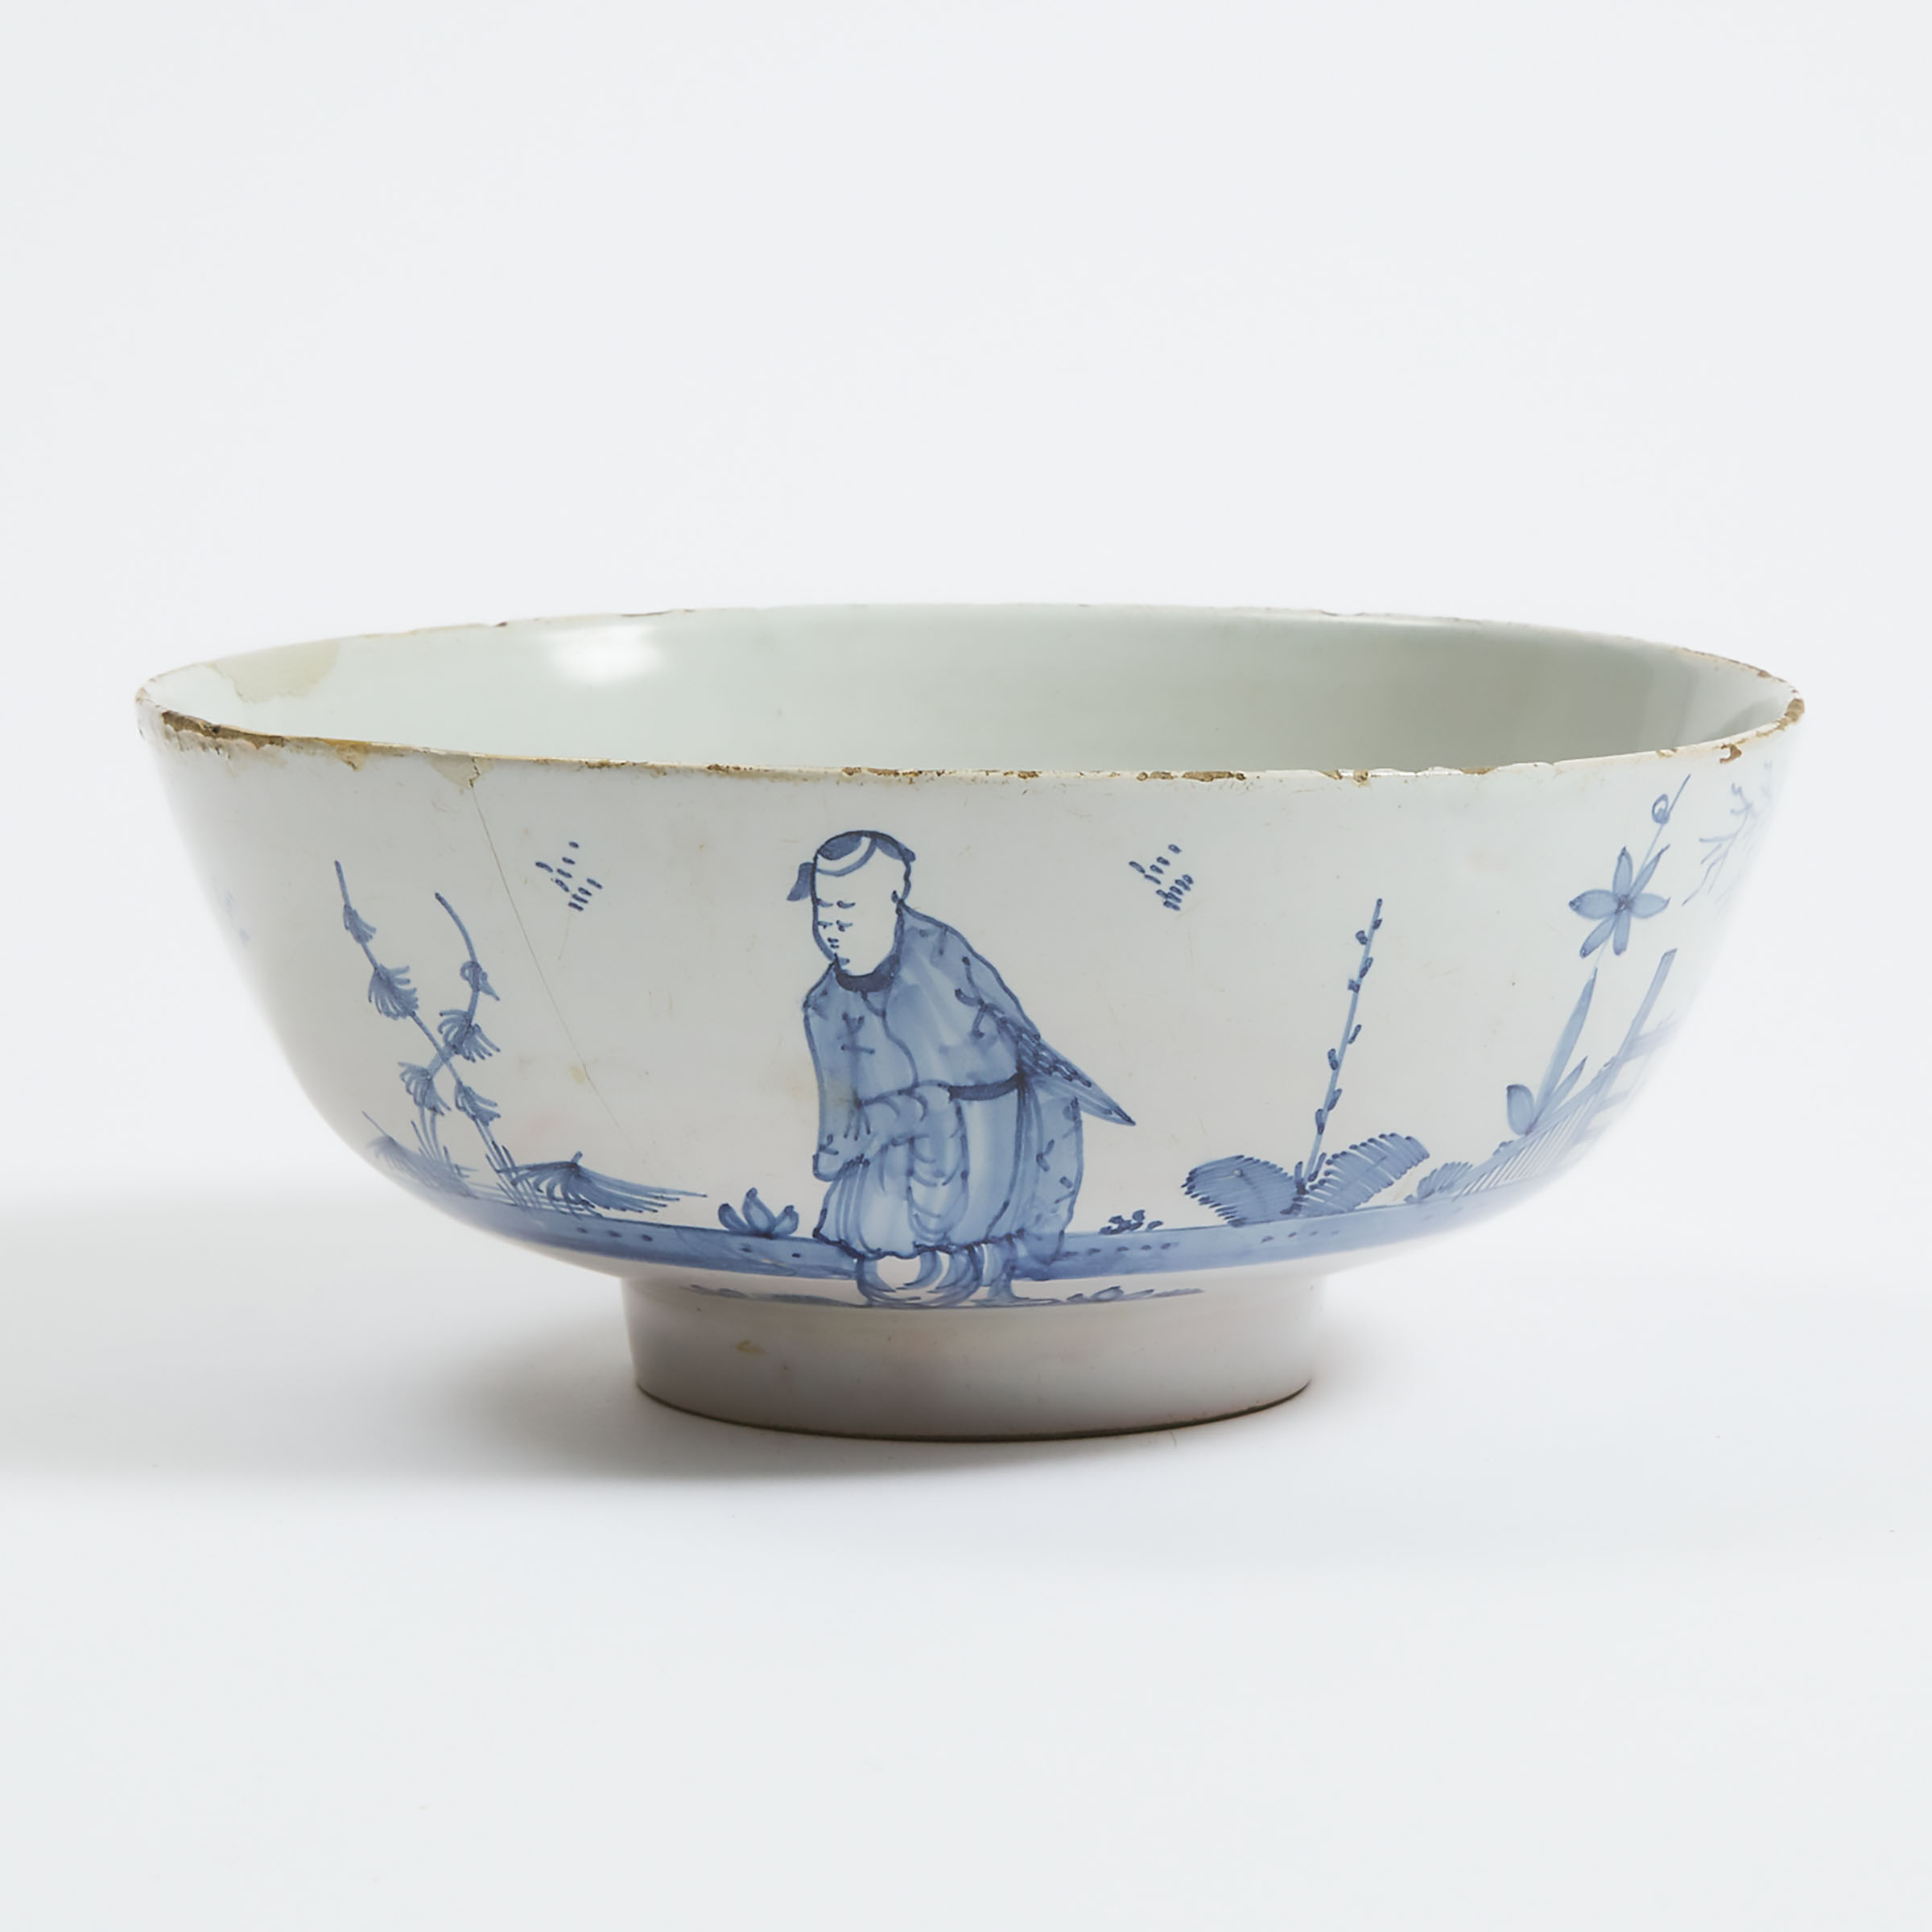 Delft Blue and White Chinoiserie Bowl, 18th century